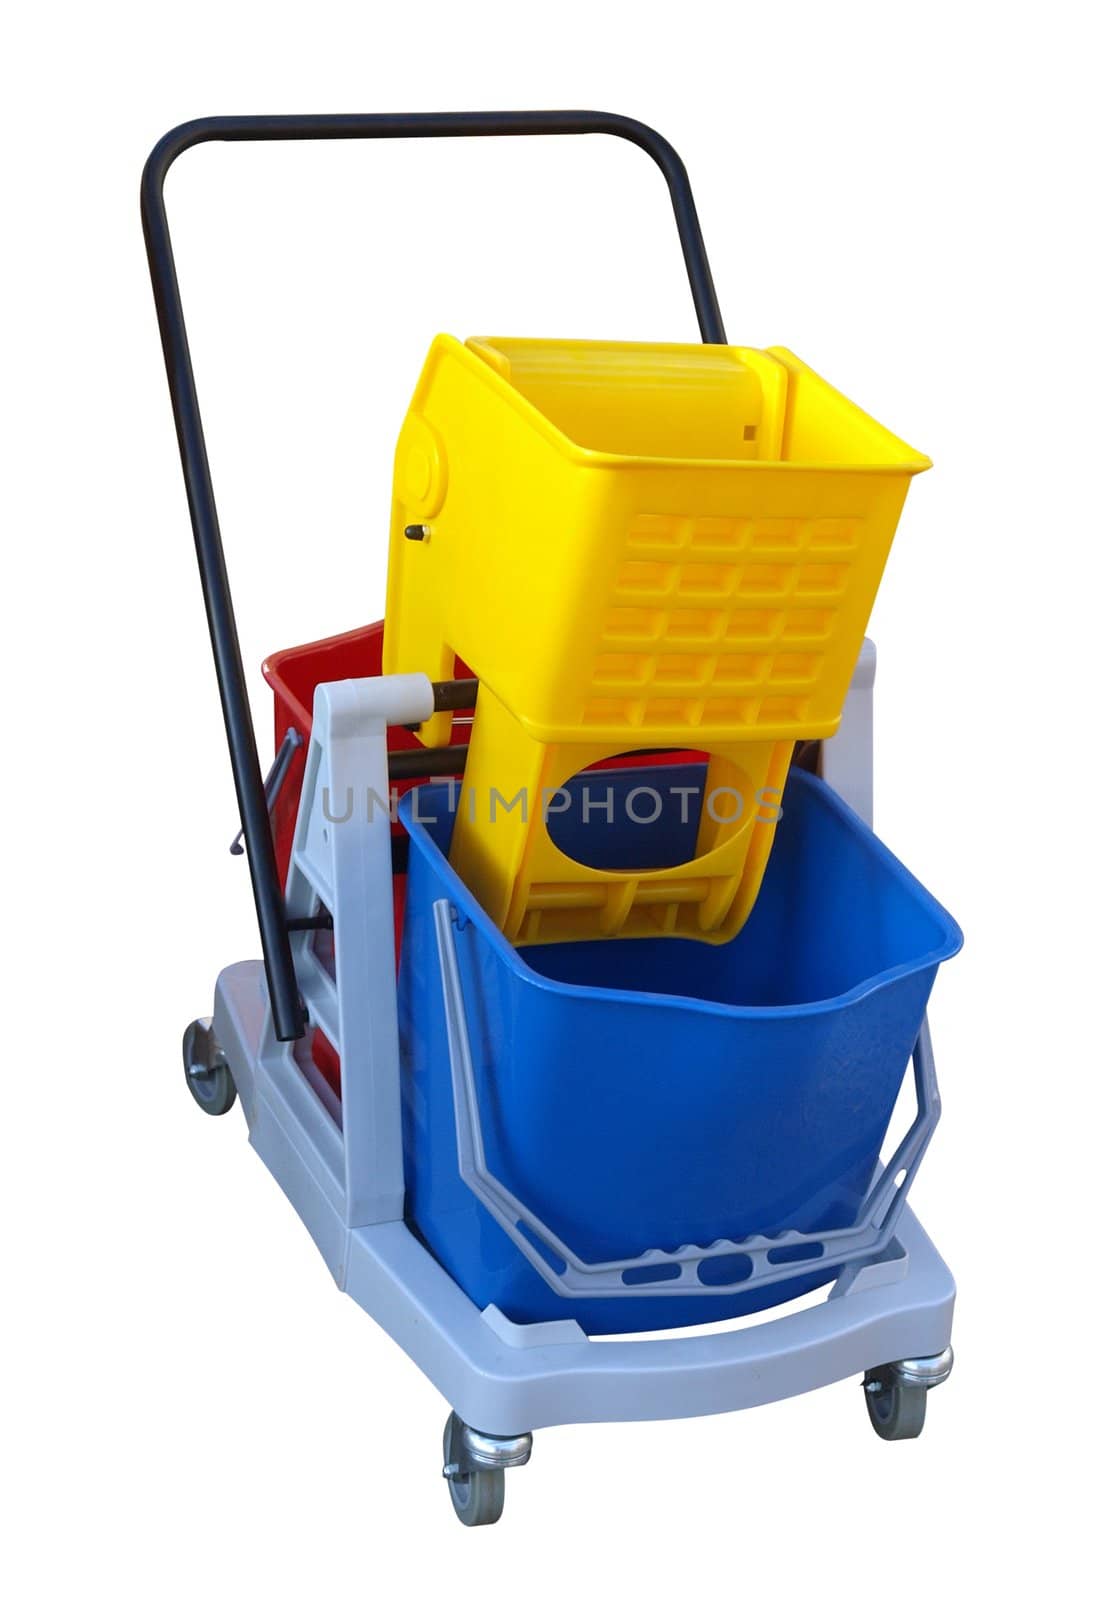 Three Plastic Buckets on a Cleaners Trolley isolated with clipping path